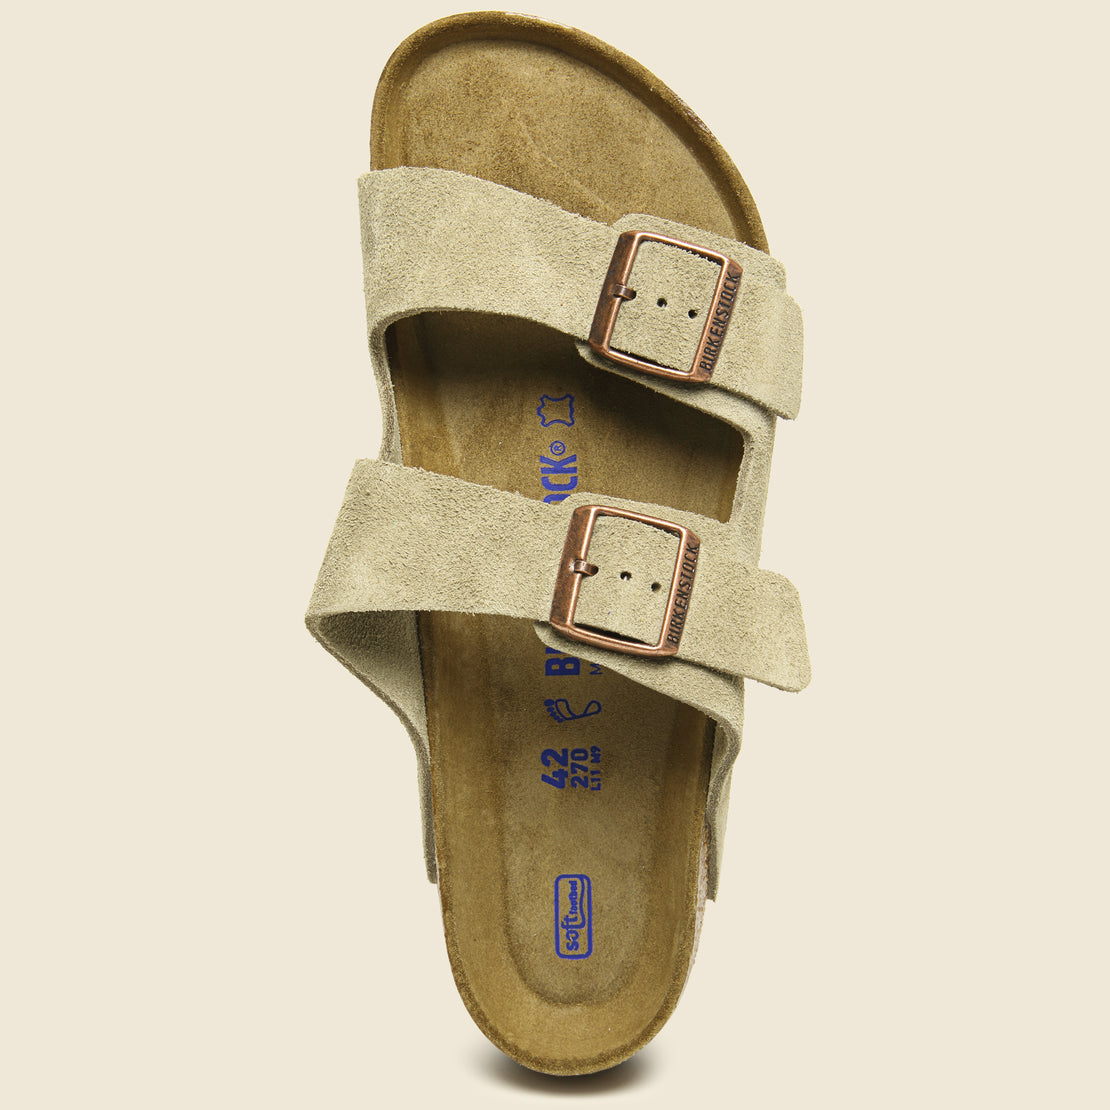 Arizona Suede Sandal - Taupe - Birkenstock - STAG Provisions - Shoes - Sandals / Flops